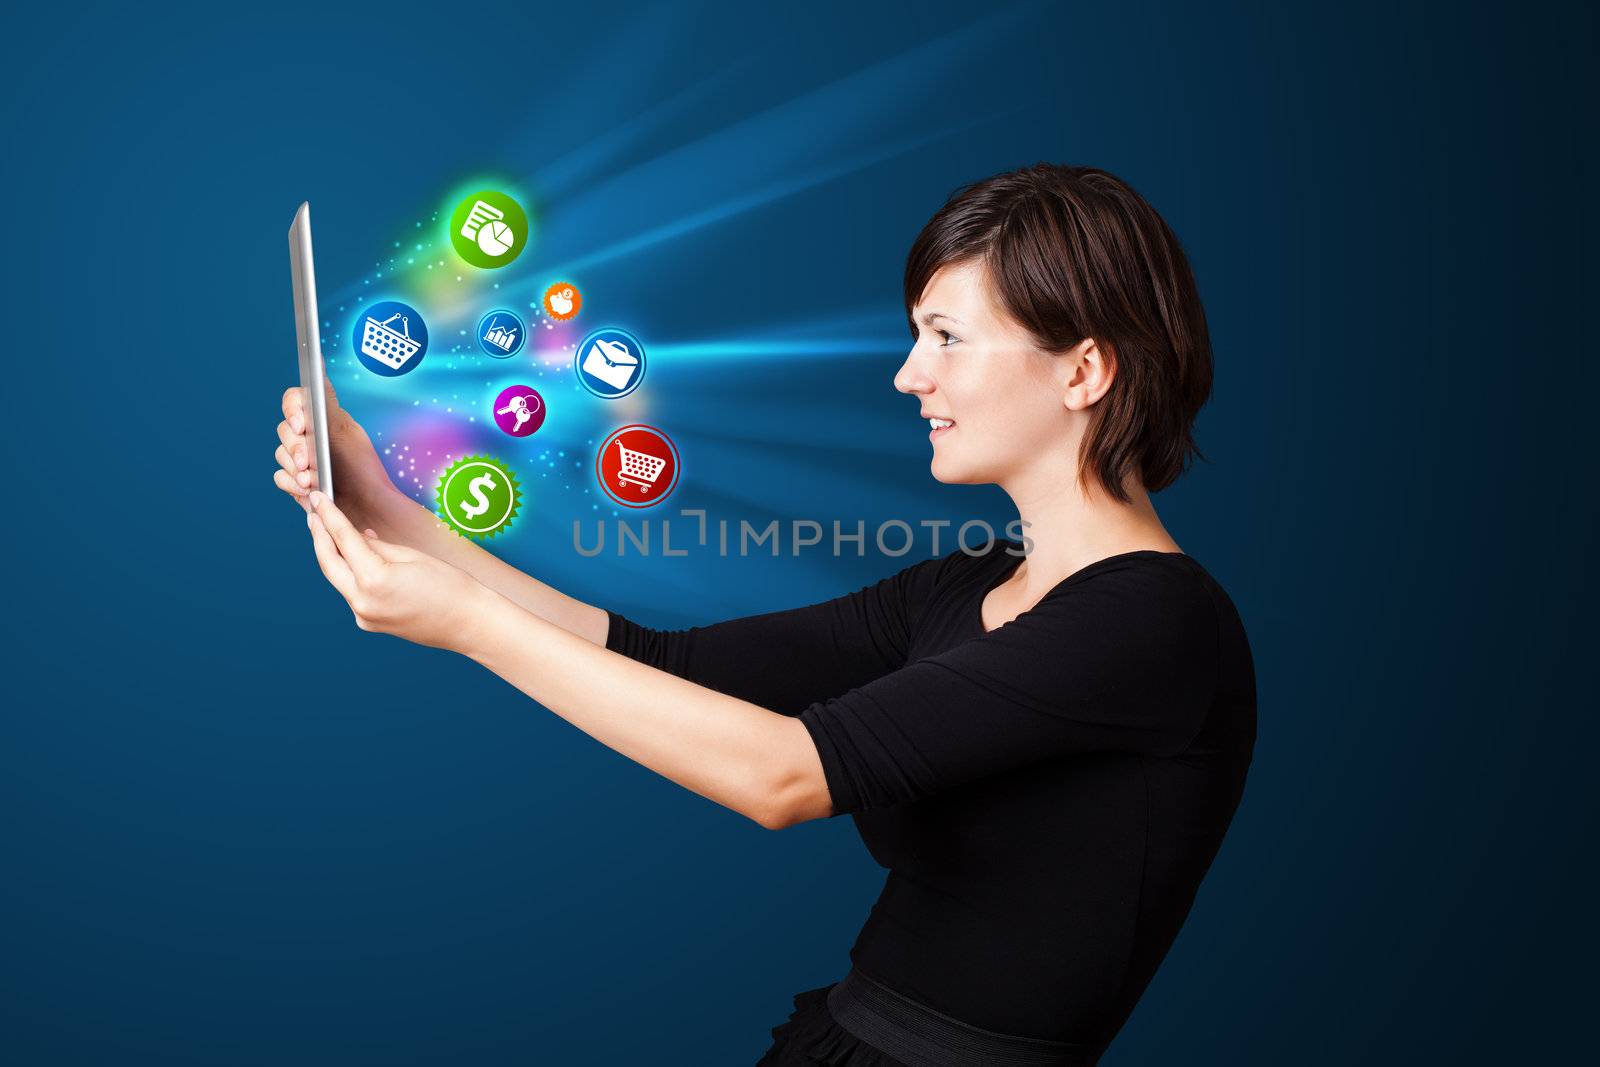 Young business woman looking at modern tablet with abstract lights and various icons